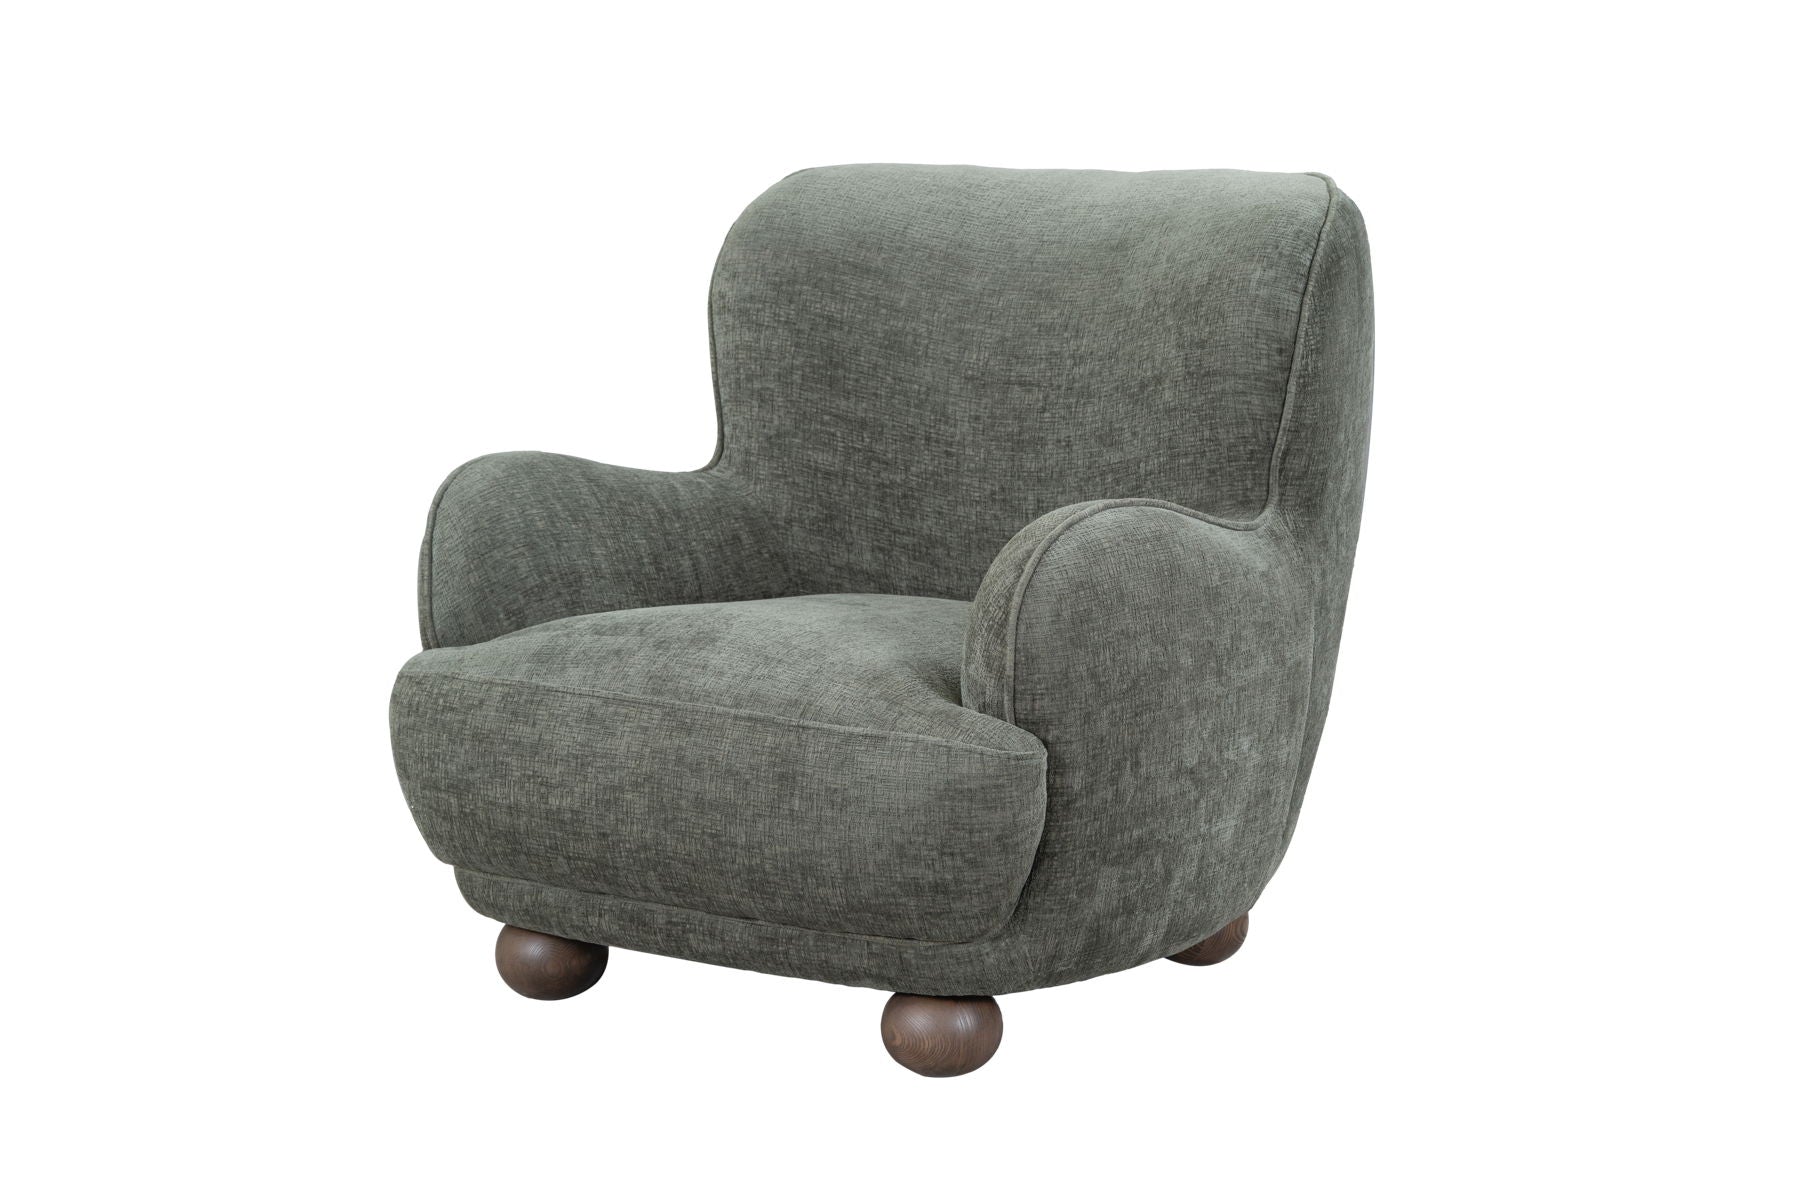 Penelope - Upholstered Accent Chair